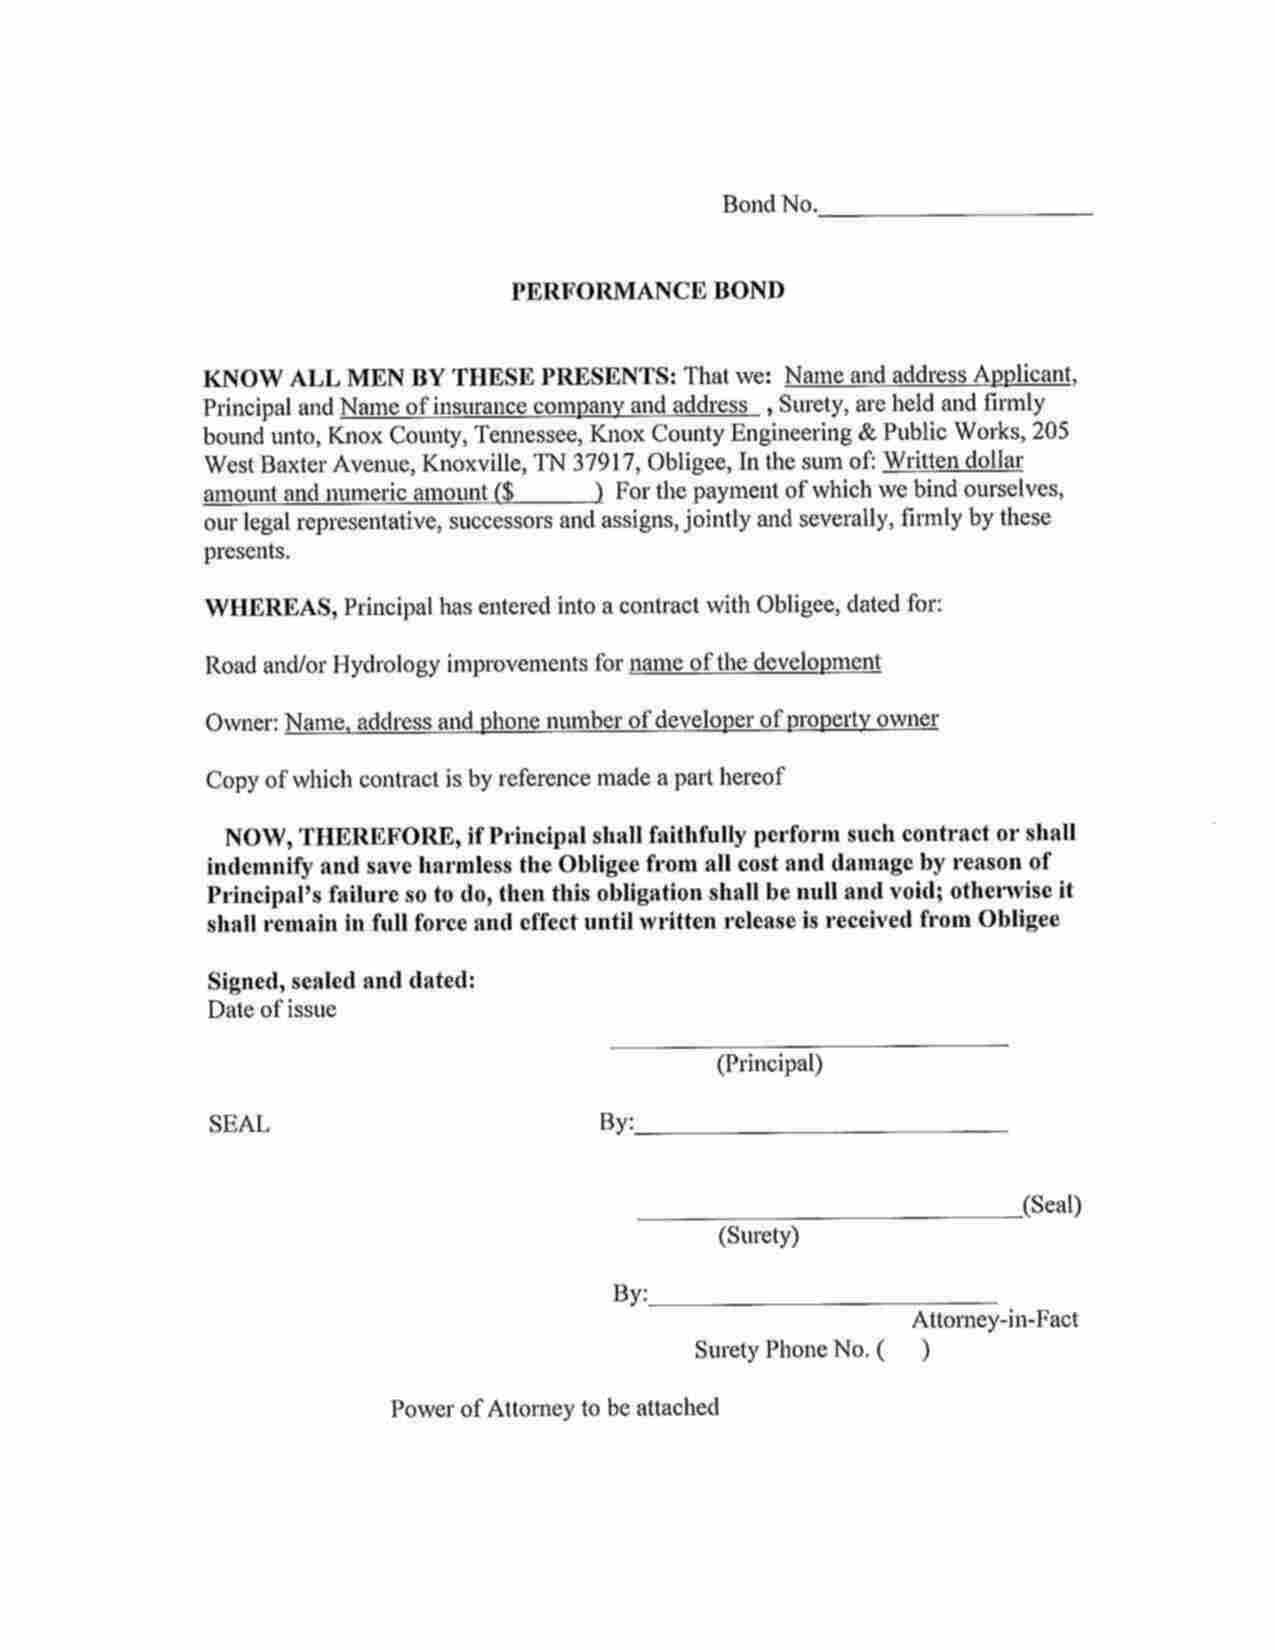 Tennessee Road and/or Hydrology Improvements Performance Bond Form